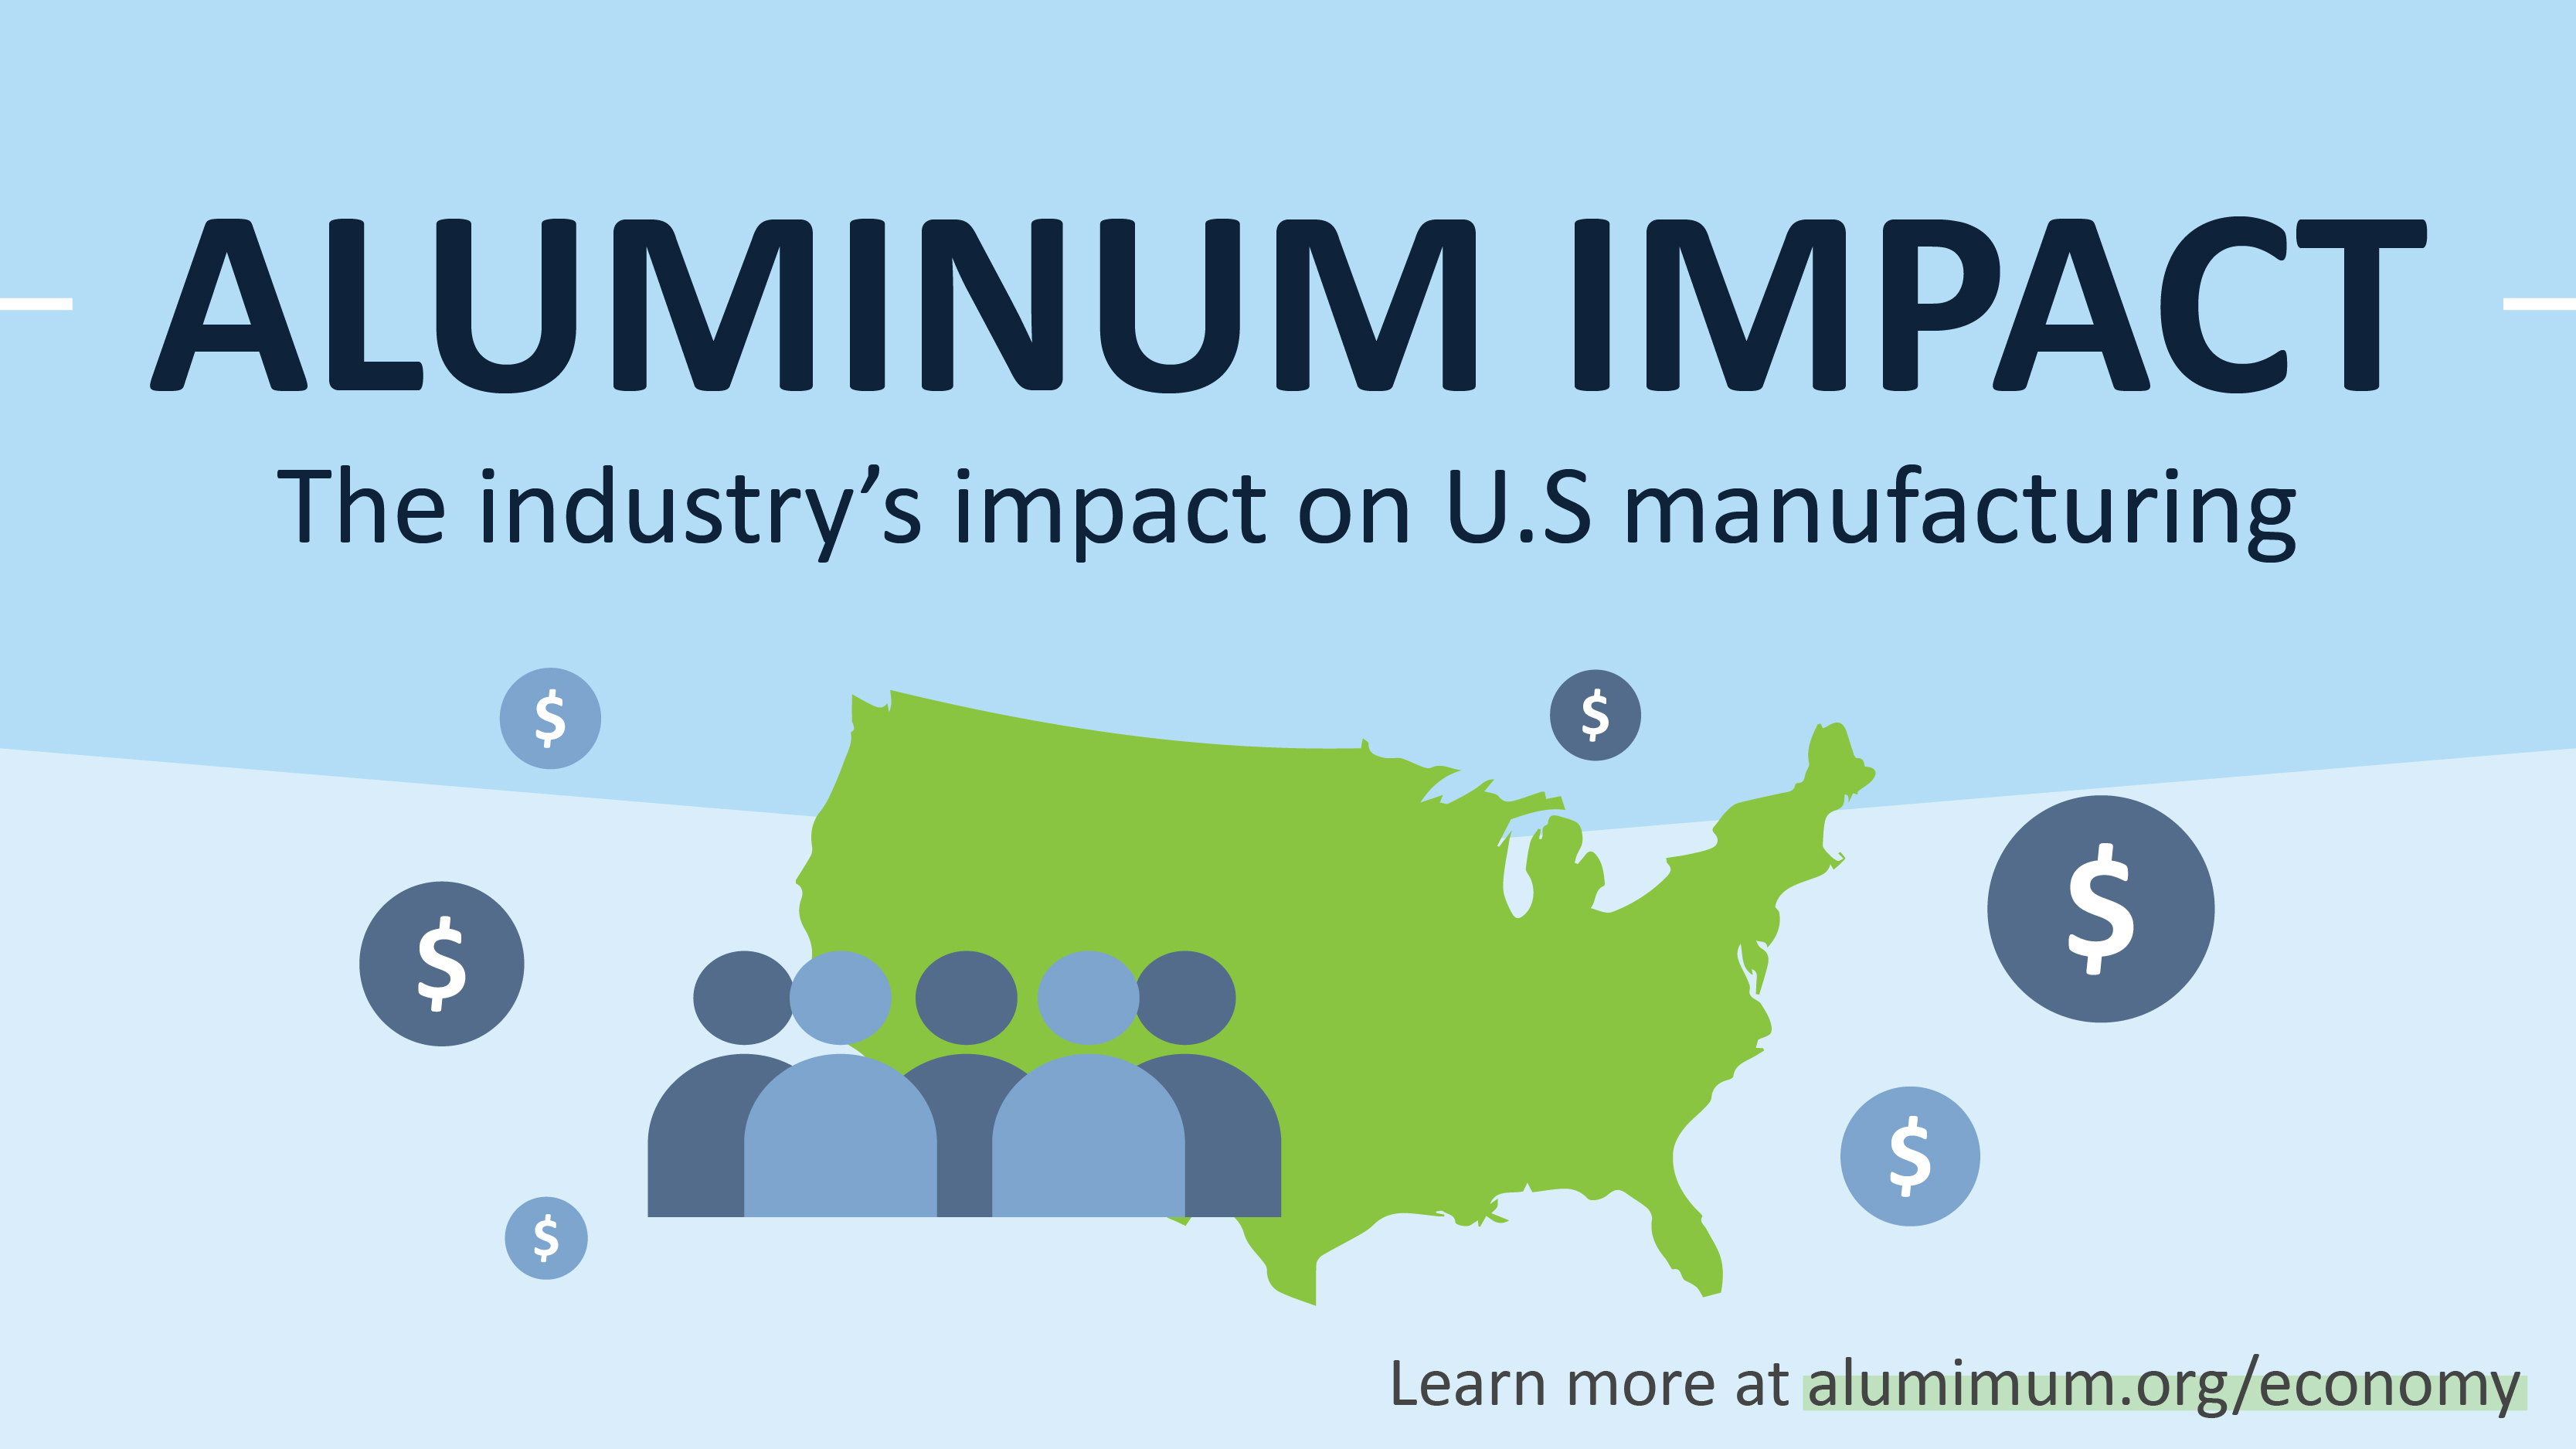 Graphic with a map of the U.S. and icons of people. Text reads "Aluminum Impact: The industry's impact on U.S. manufacturing"